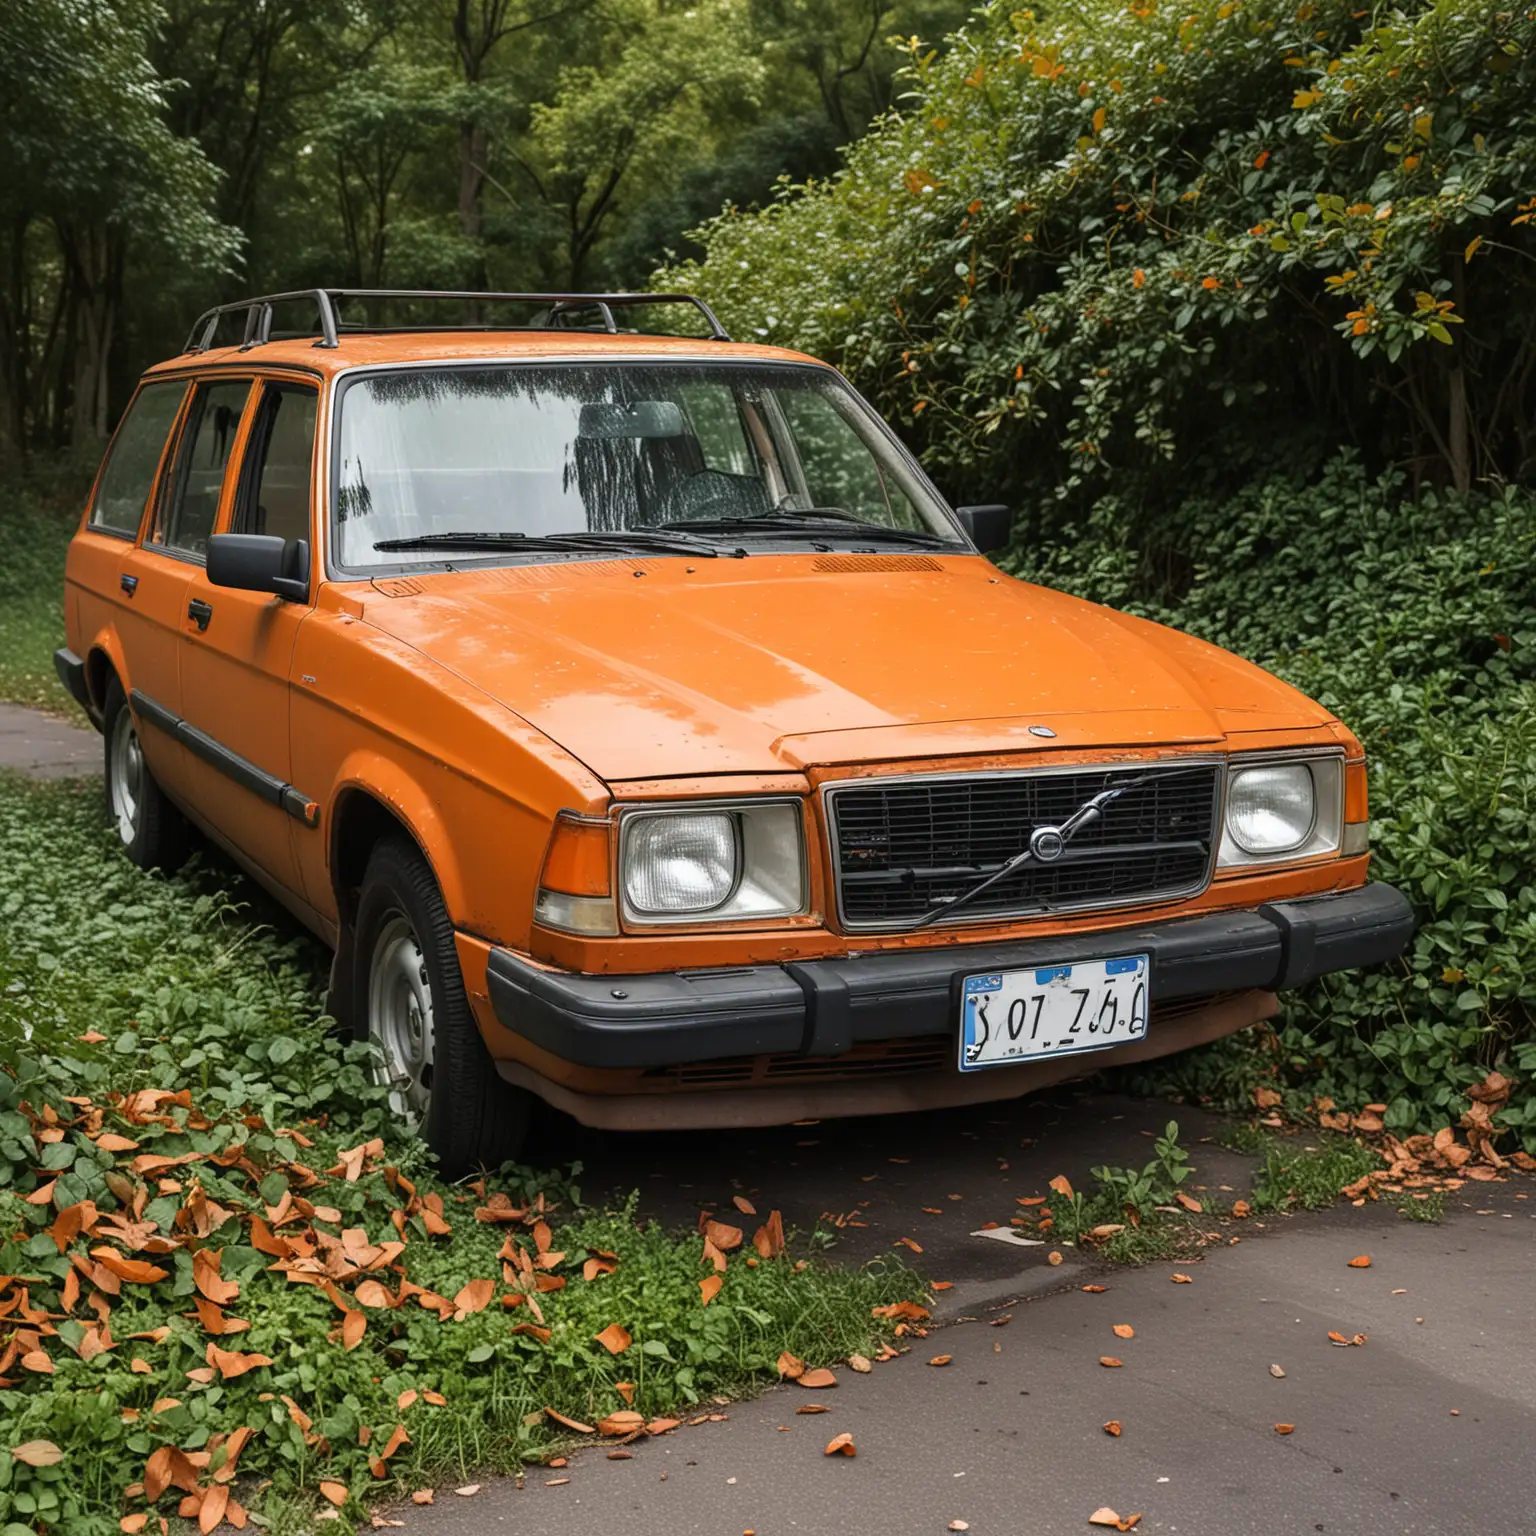 Naive photo realism, an orange Volvo 70s style is abandoned on a parking slot, overgrown with bushes and leaves.